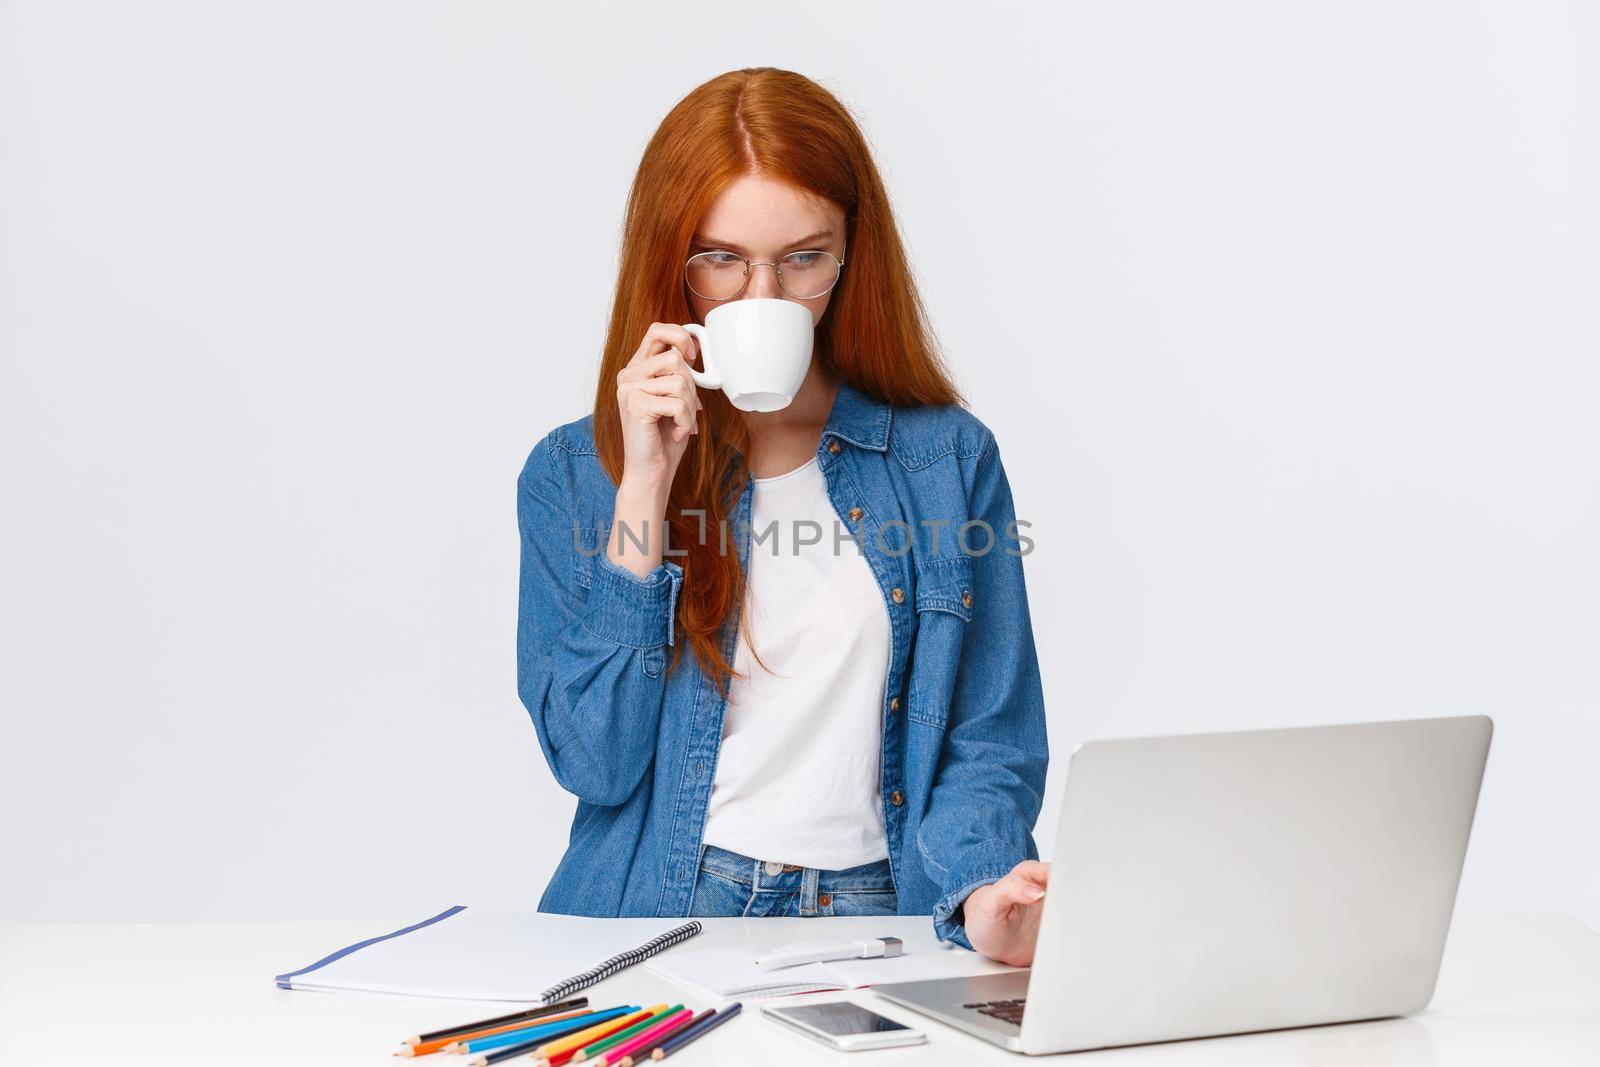 Serious-looking determined redhead female designer, office worker have no time for coffee break, sipping from cup, looking at laptop as working over important project, stand white background.